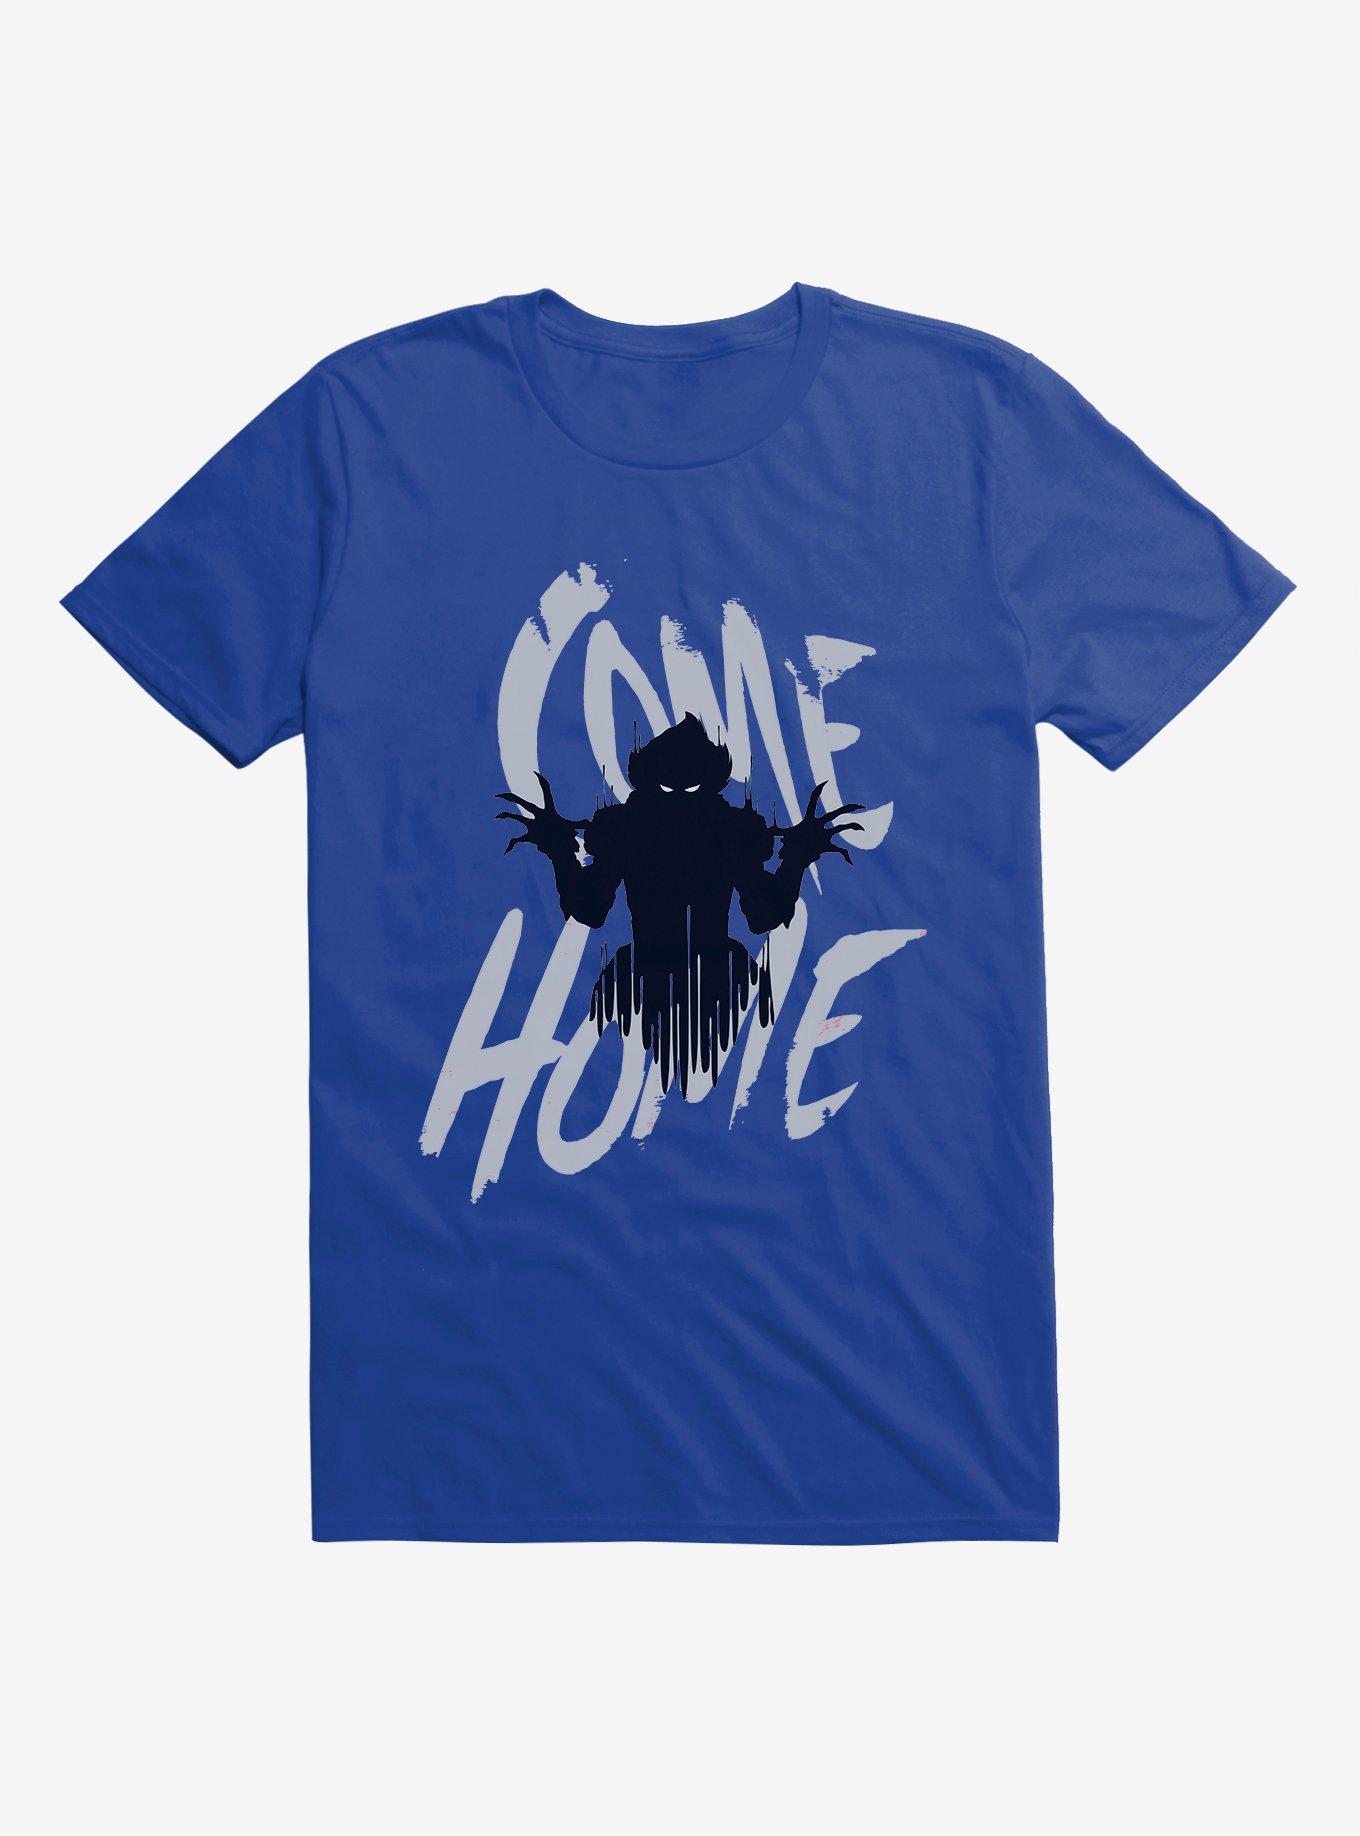 IT Chapter Two Pennywise Shadow Come Home Gray Script T-Shirt, ROYAL BLUE, hi-res